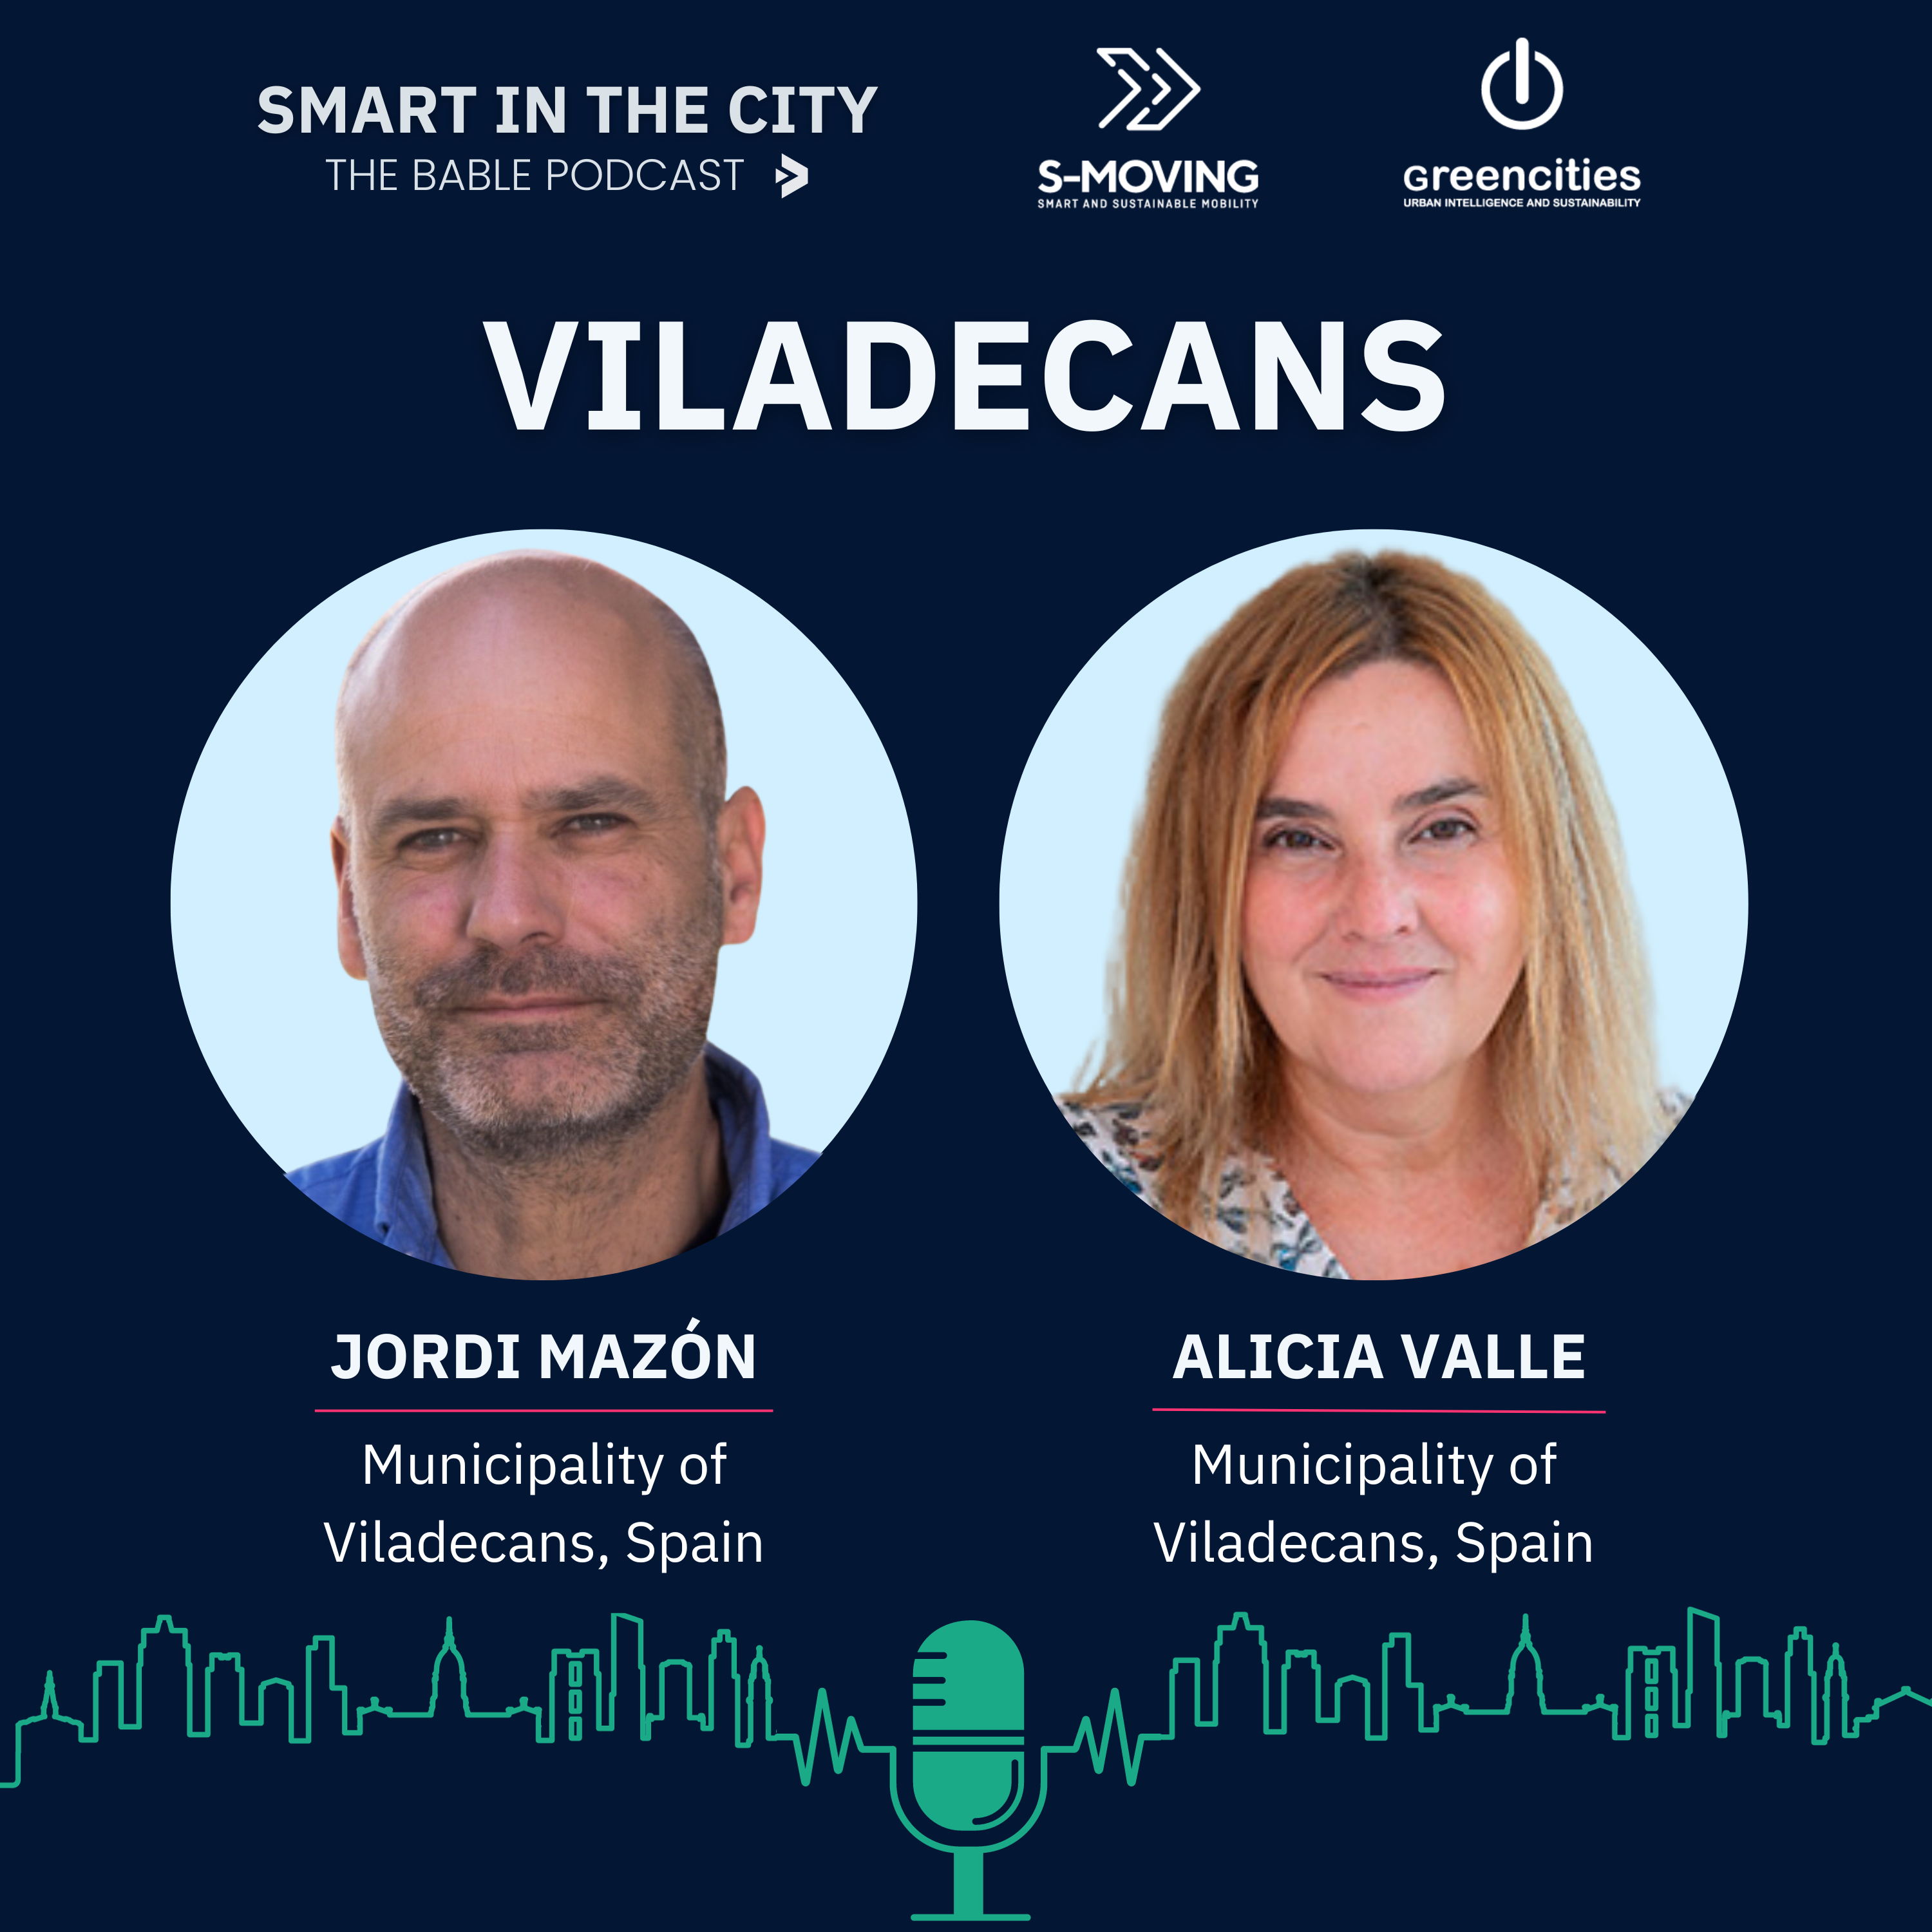 #46 Viladecans: "One Of The Most Sustainable Cities In Spain"